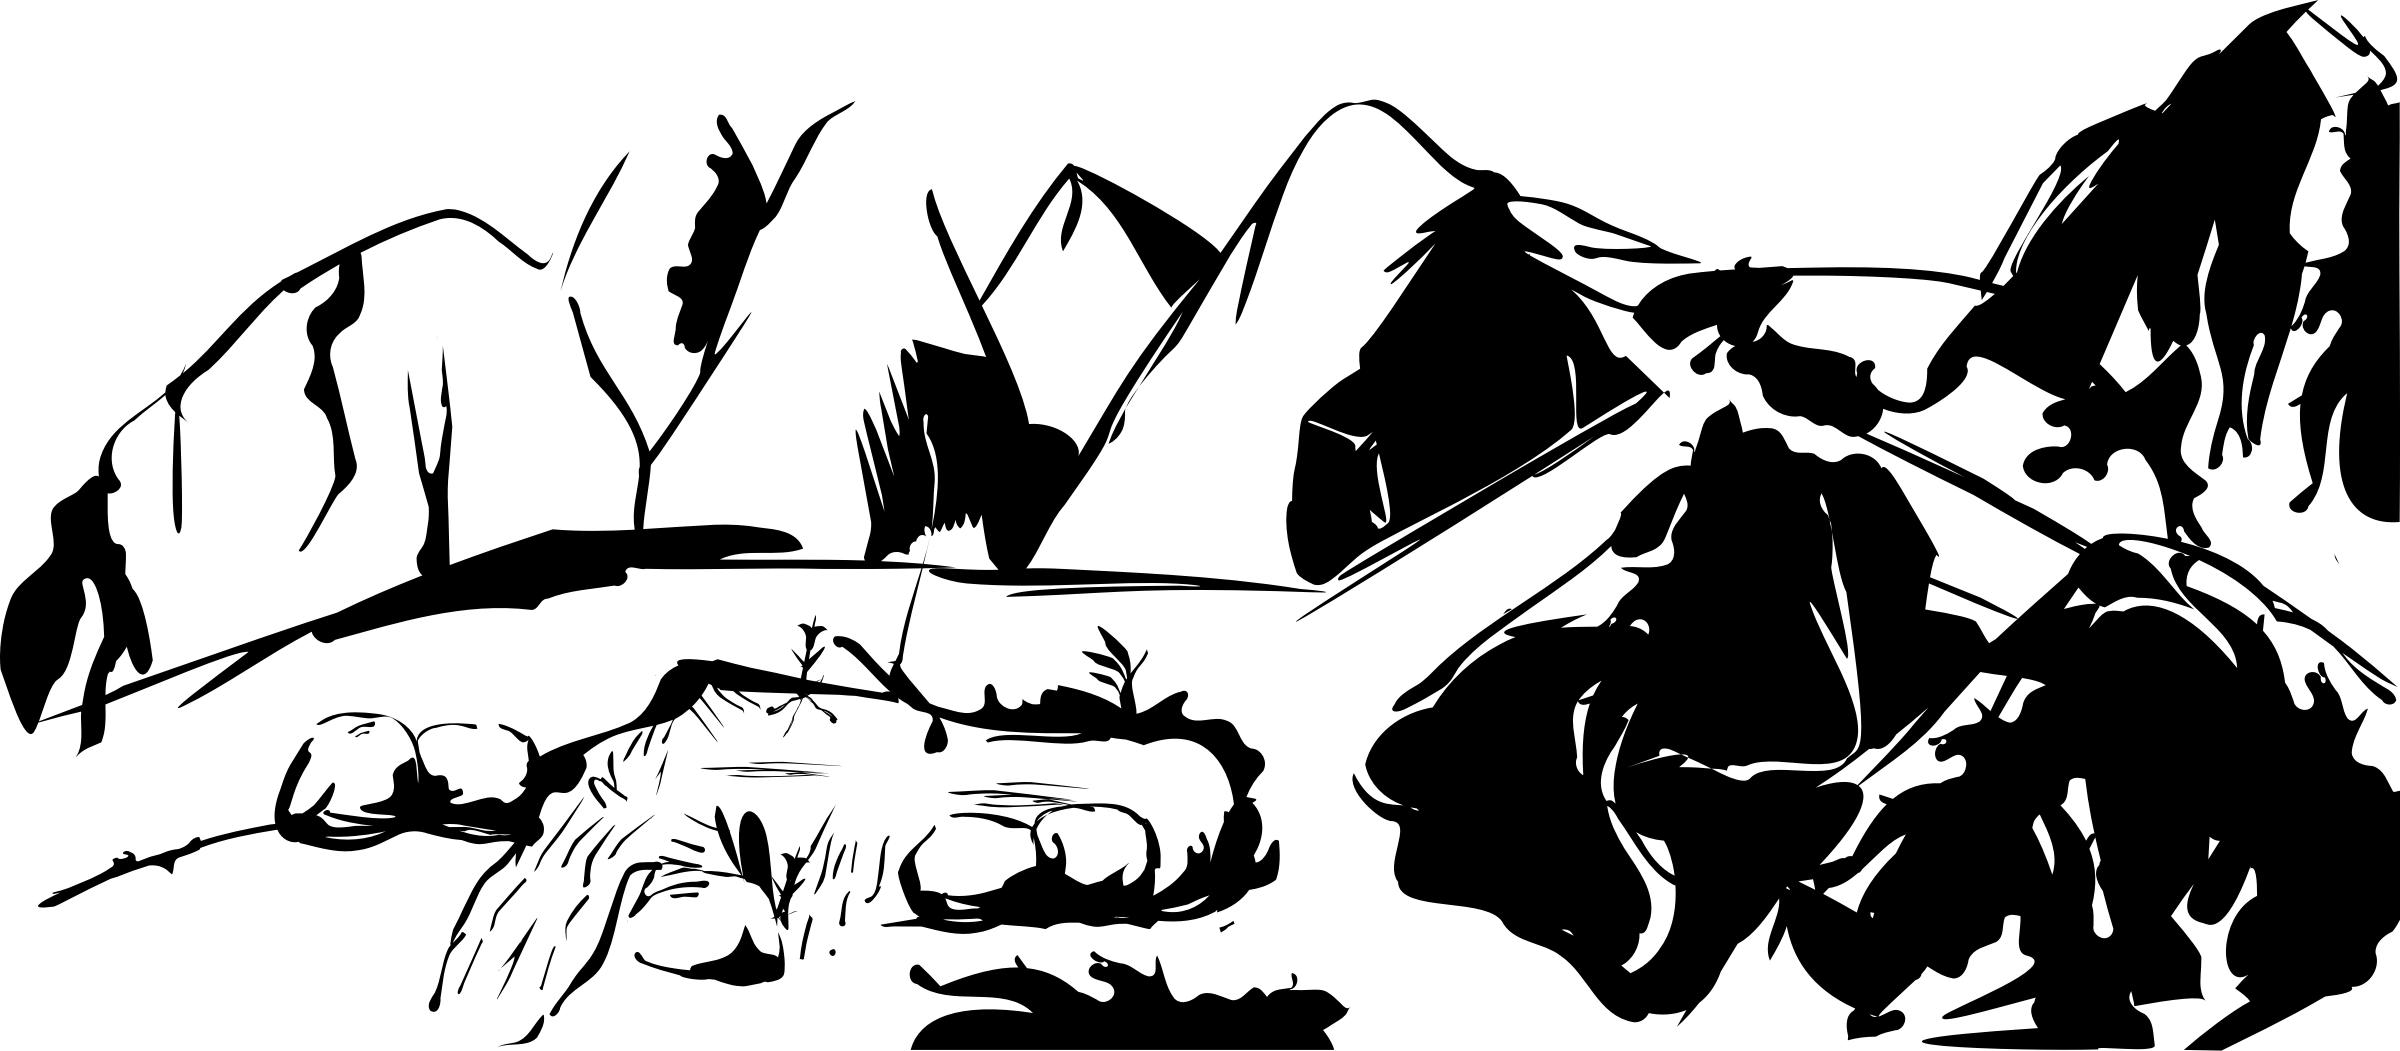 Moumtains with wilder pond png